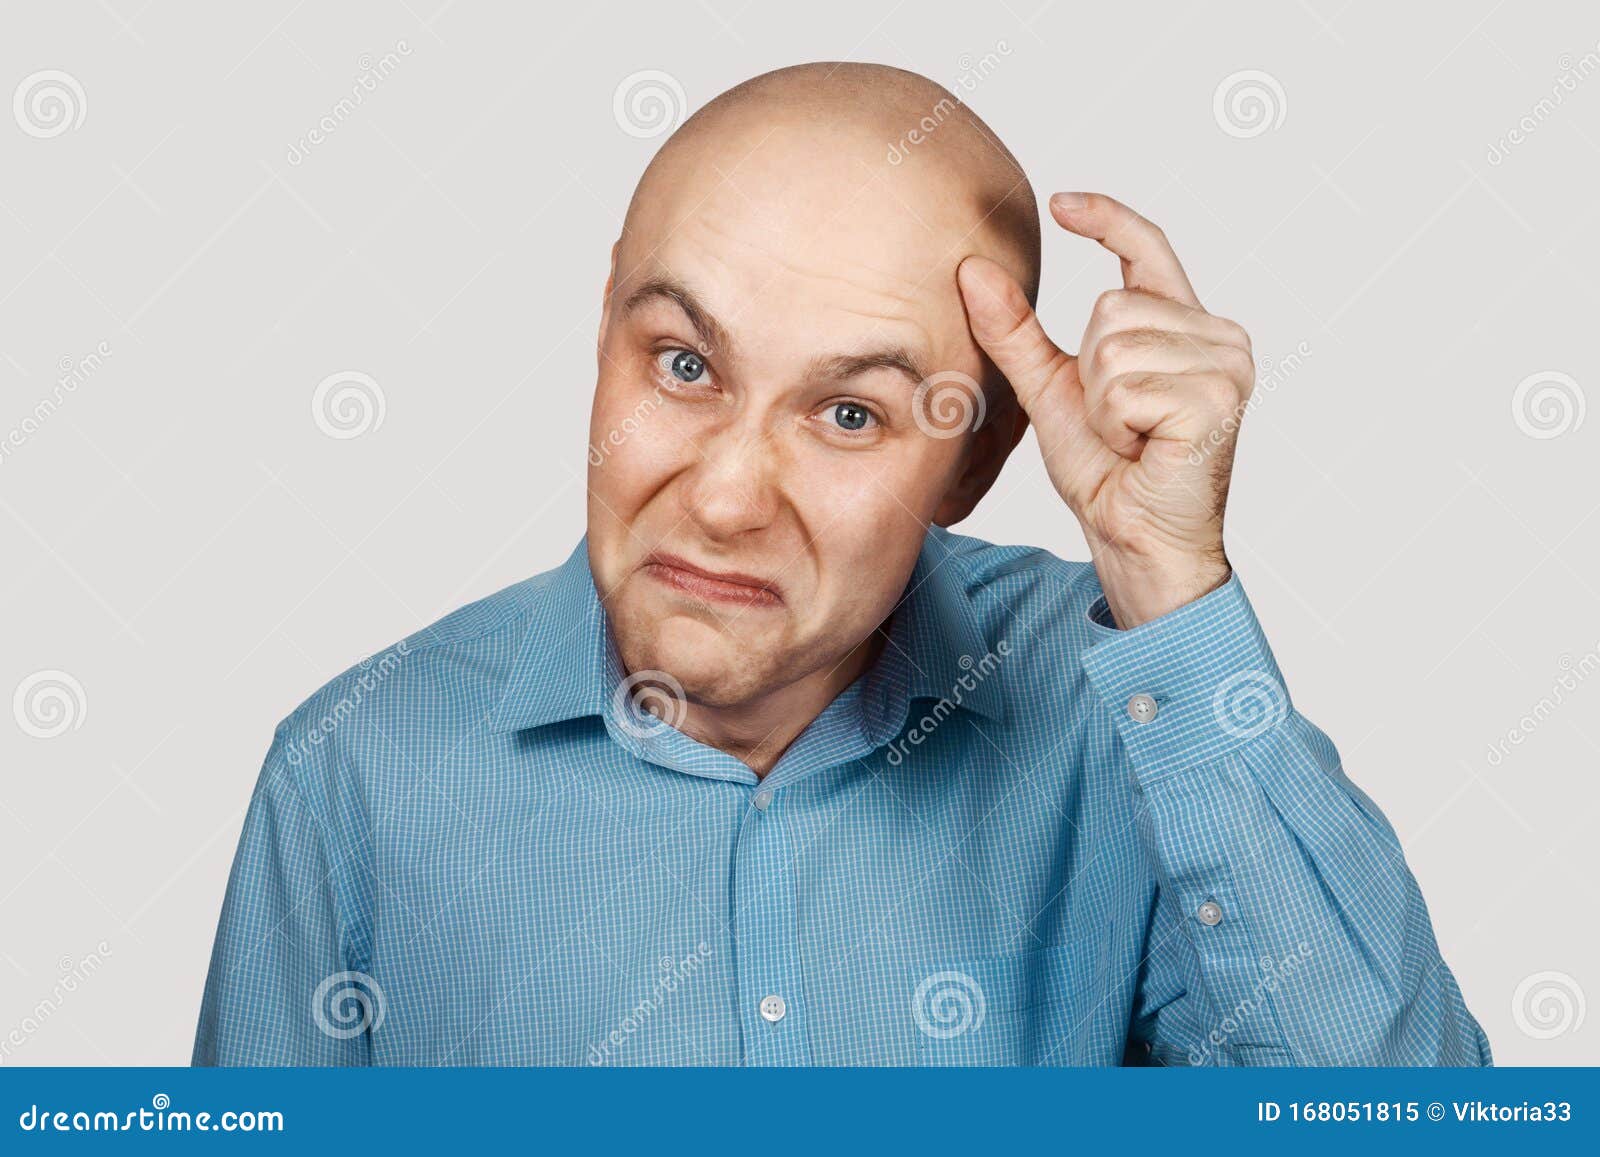 A Bald Guy Shows a Hand Gesture Meaning a Very Small Amount of Something  Stock Image - Image of bigness, person: 168051815